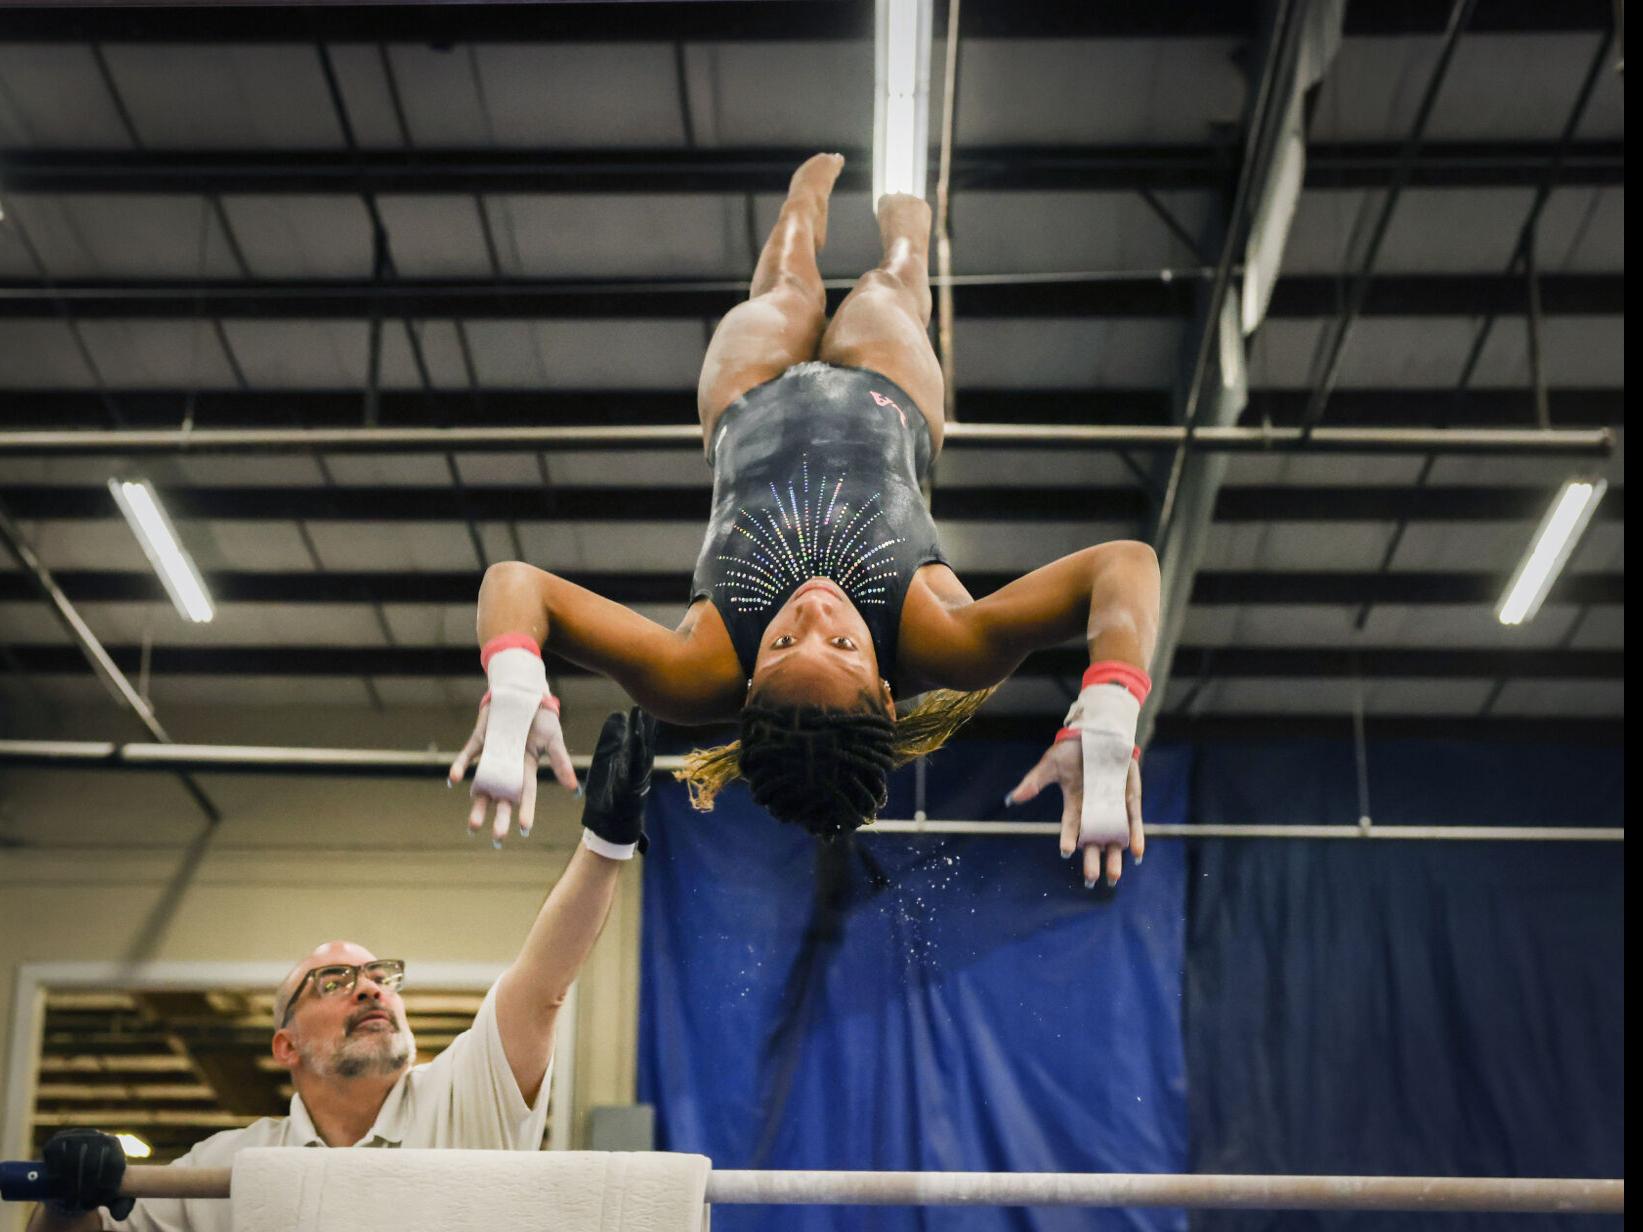 Gymnast taking first leaps into elite-level competition